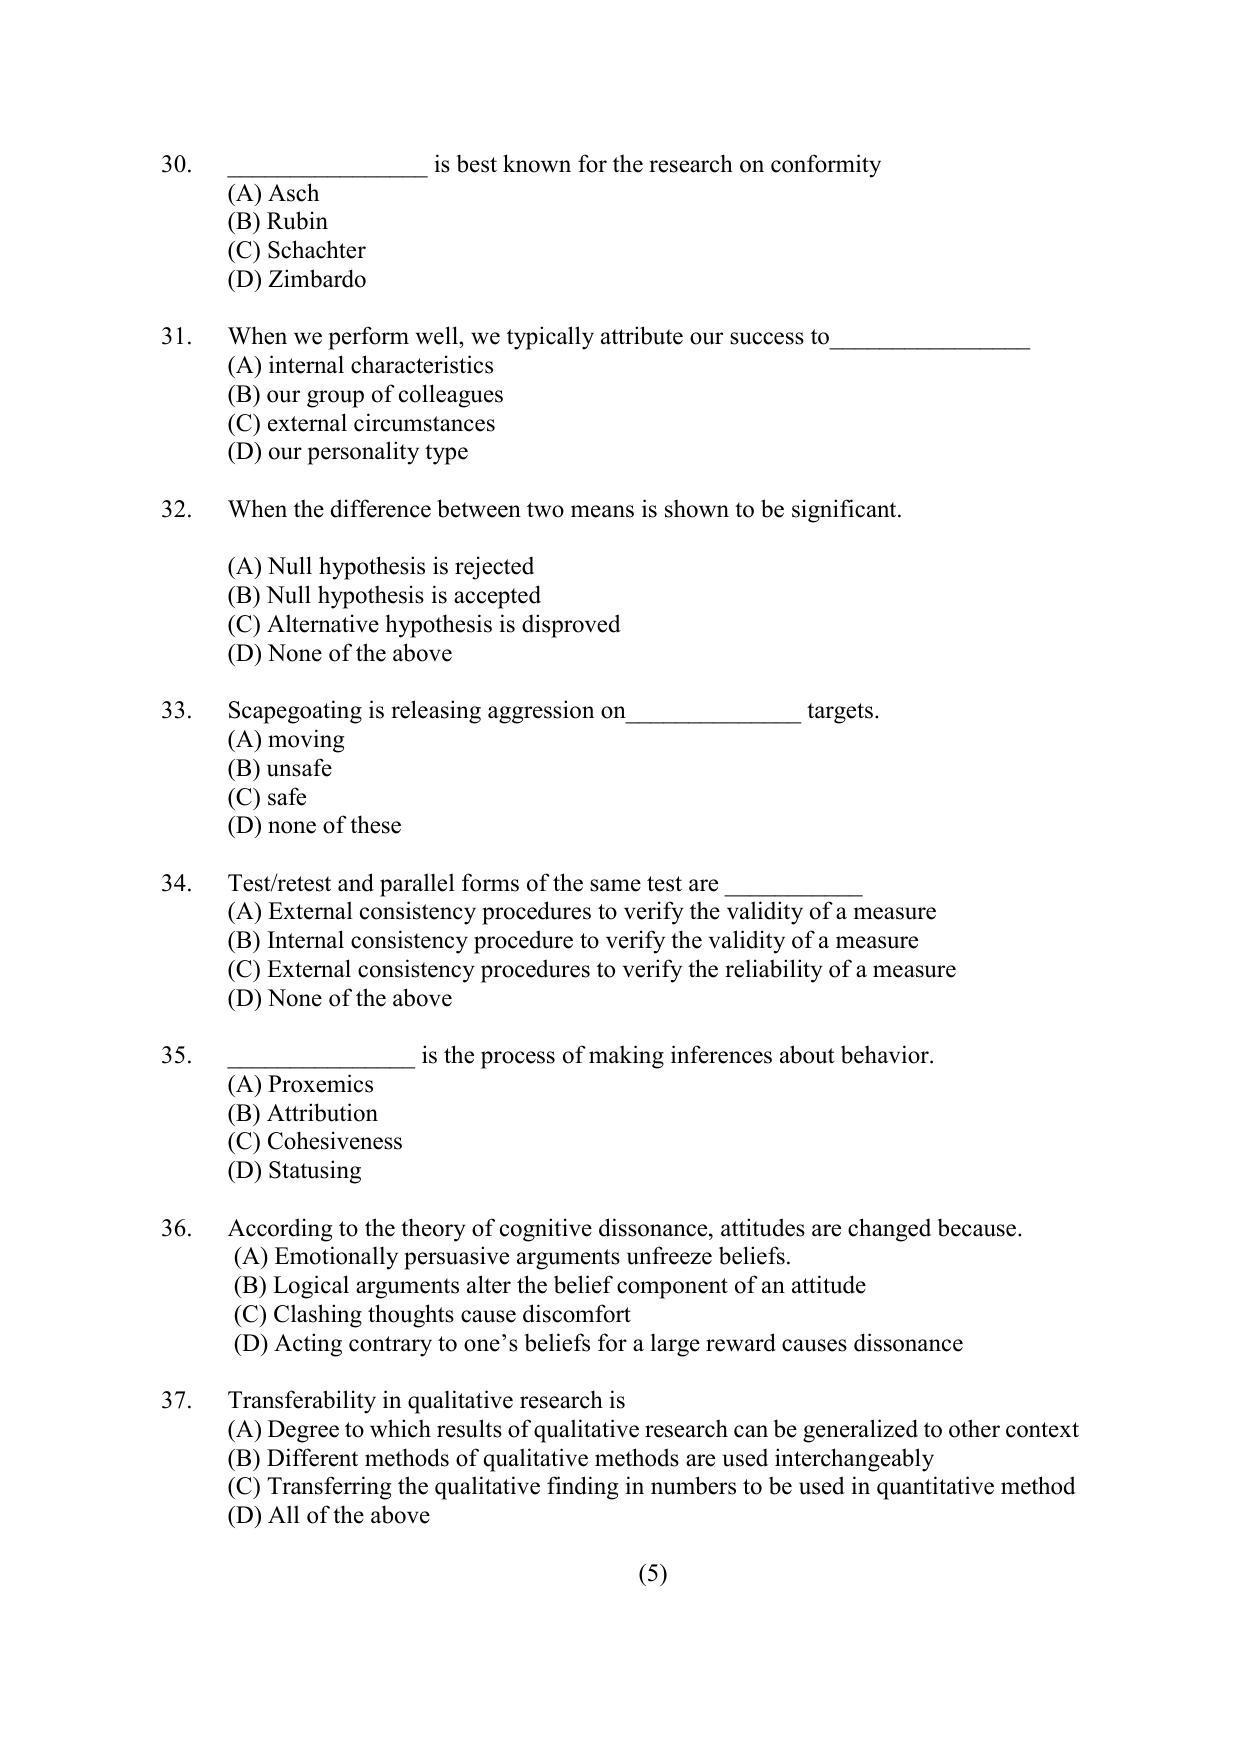 PU MPET Ancient Indian History & Archeology 2022 Question Papers - Page 36